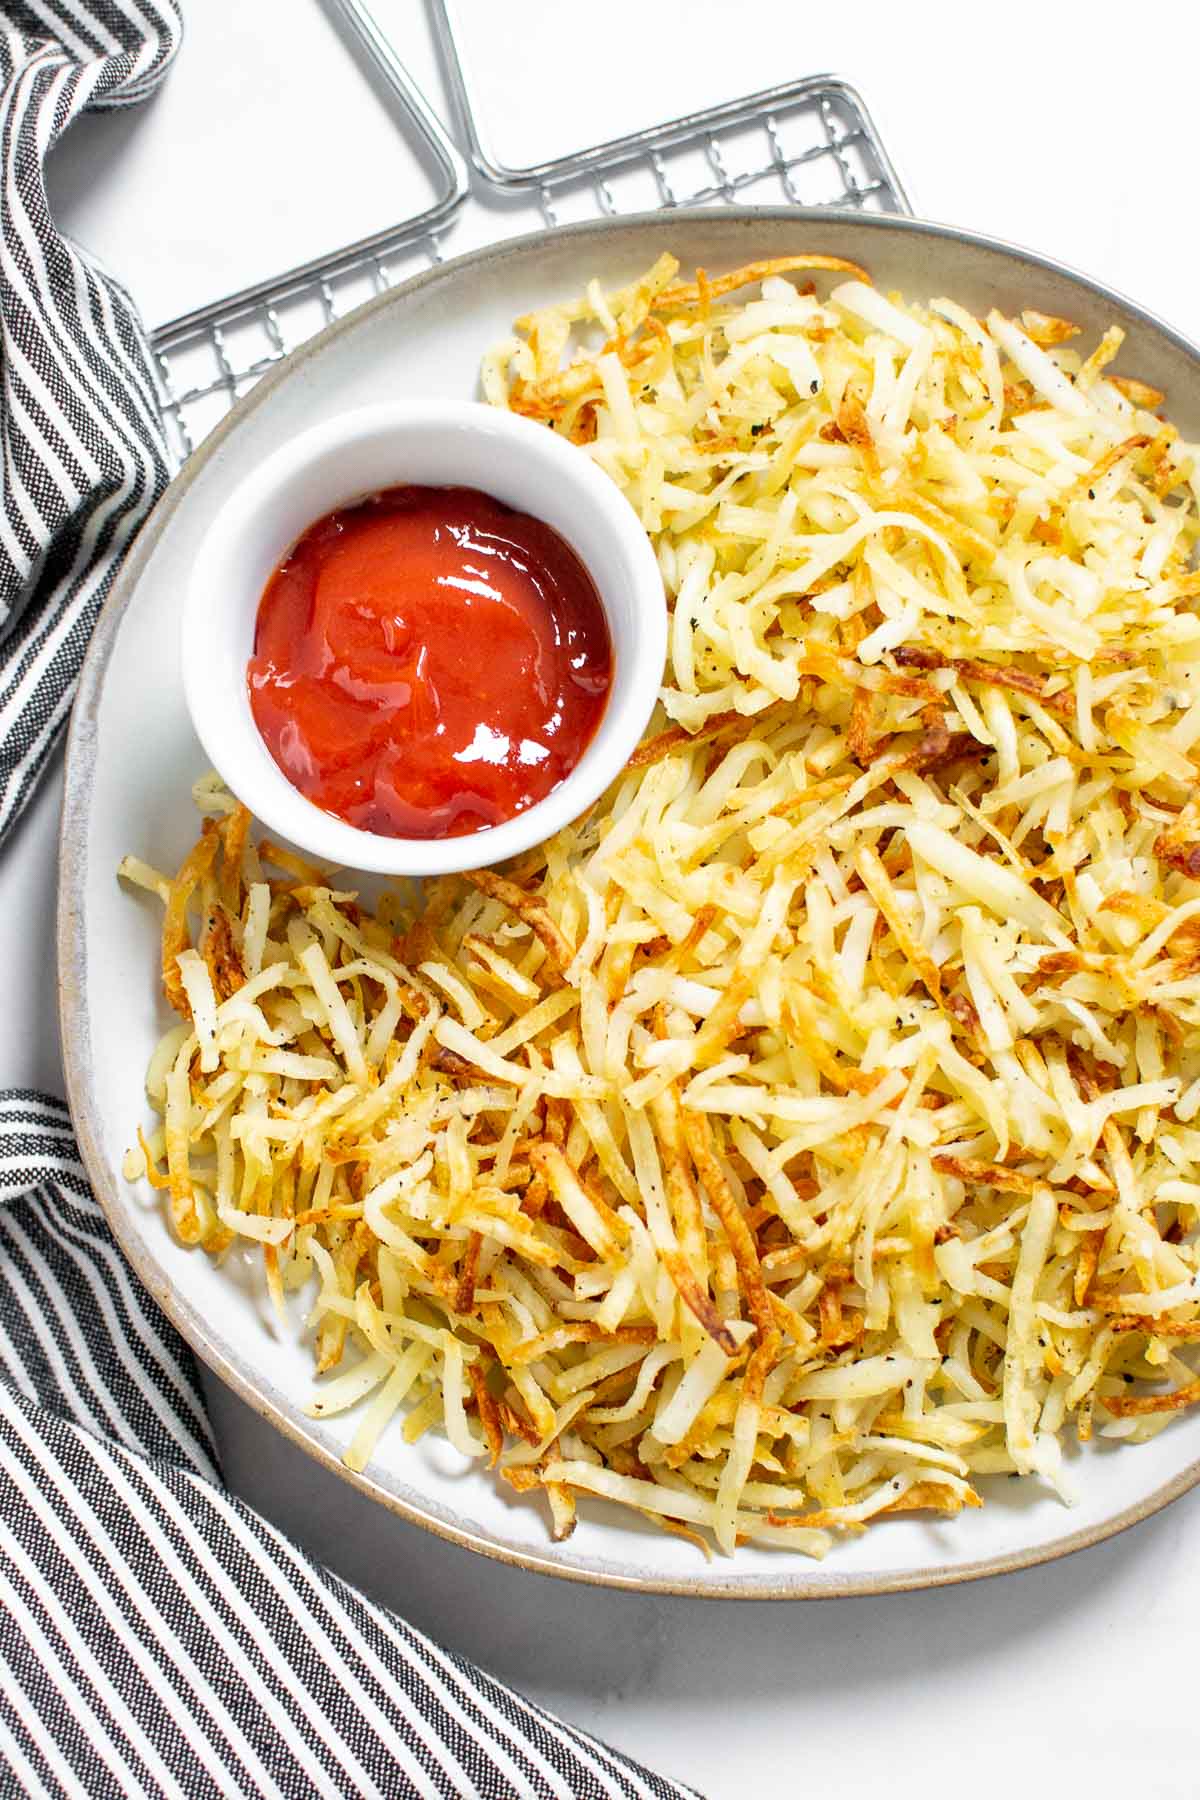 Hash browns cooked in the air fryer on a plate with a small bowl of ketchup.